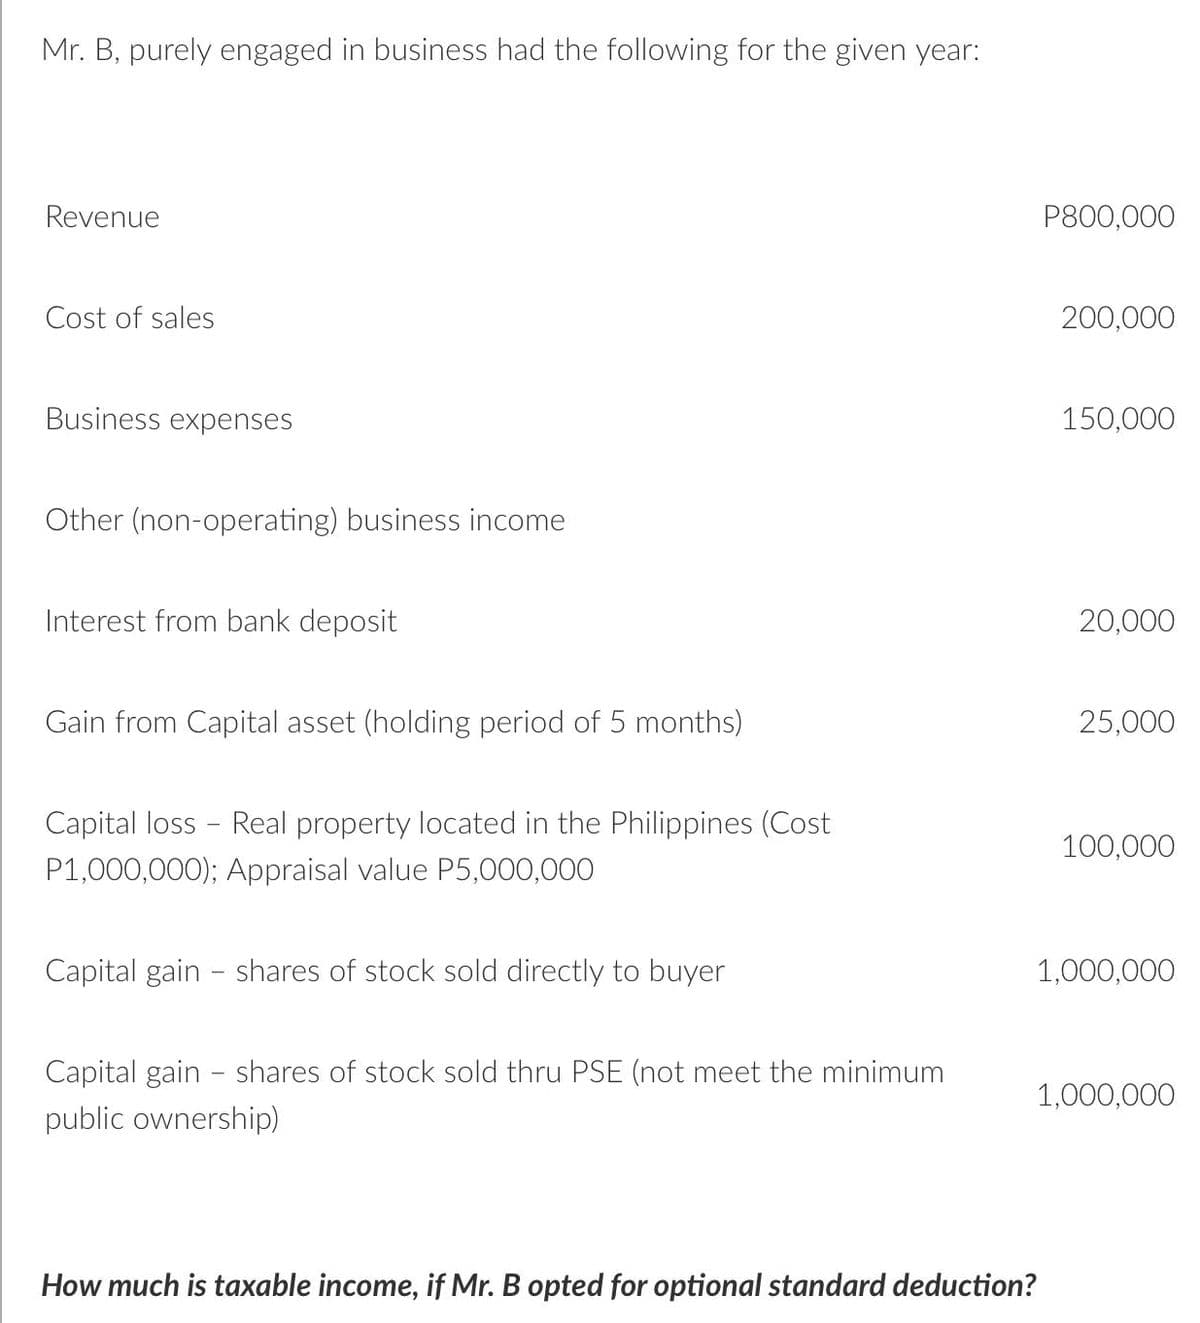 Mr. B, purely engaged in business had the following for the given year:
Revenue
P800,000
Cost of sales
200,000
Business expenses
150,000
Other (non-operating) business income
Interest from bank deposit
20,000
Gain from Capital asset (holding period of 5 months)
25,000
Capital loss - Real property located in the Philippines (Cost
100,000
P1,000,000); Appraisal value P5,000,000
Capital gain - shares of stock sold directly to buyer
1,000,000
Capital gain - shares of stock sold thru PSE (not meet the minimum
1,000,000
public ownership)
How much is taxable income, if Mr. B opted for optional standard deduction?
